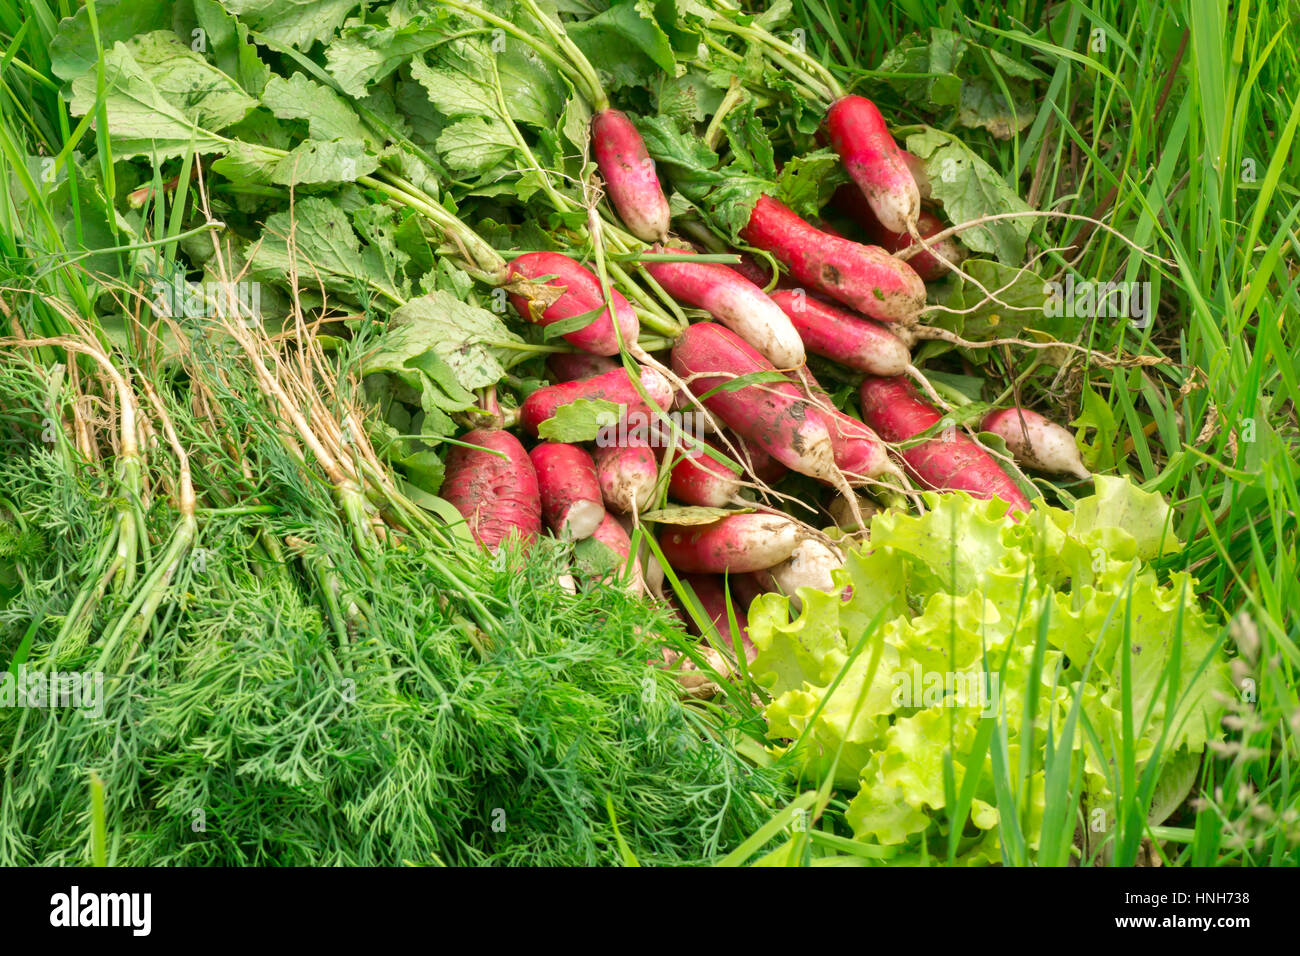 Freshly picked vegetables. The harvest in the grass. Radishes, lettuce, dill in the garden. Natural unwashed vegetables. Ingredients for a spring sala Stock Photo